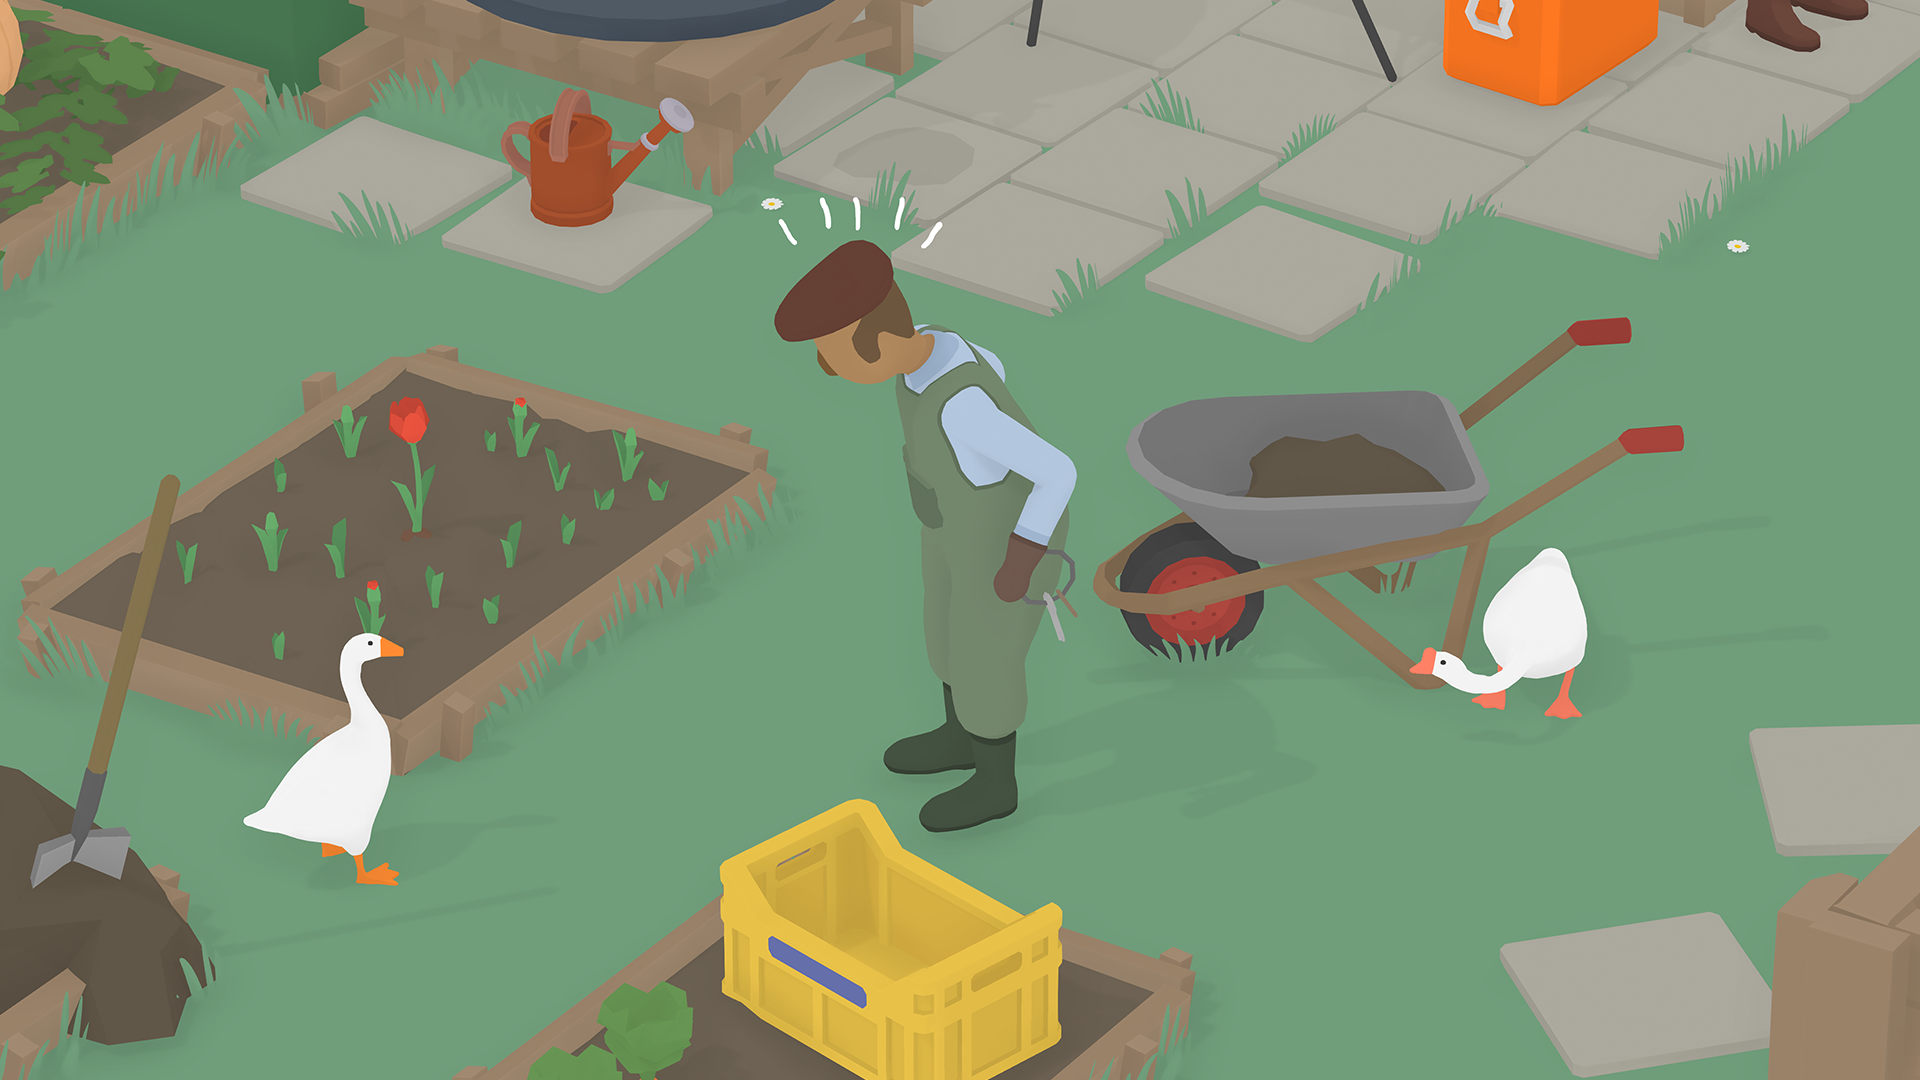 Untitled Goose Game hits Steam in September, with multiplayer